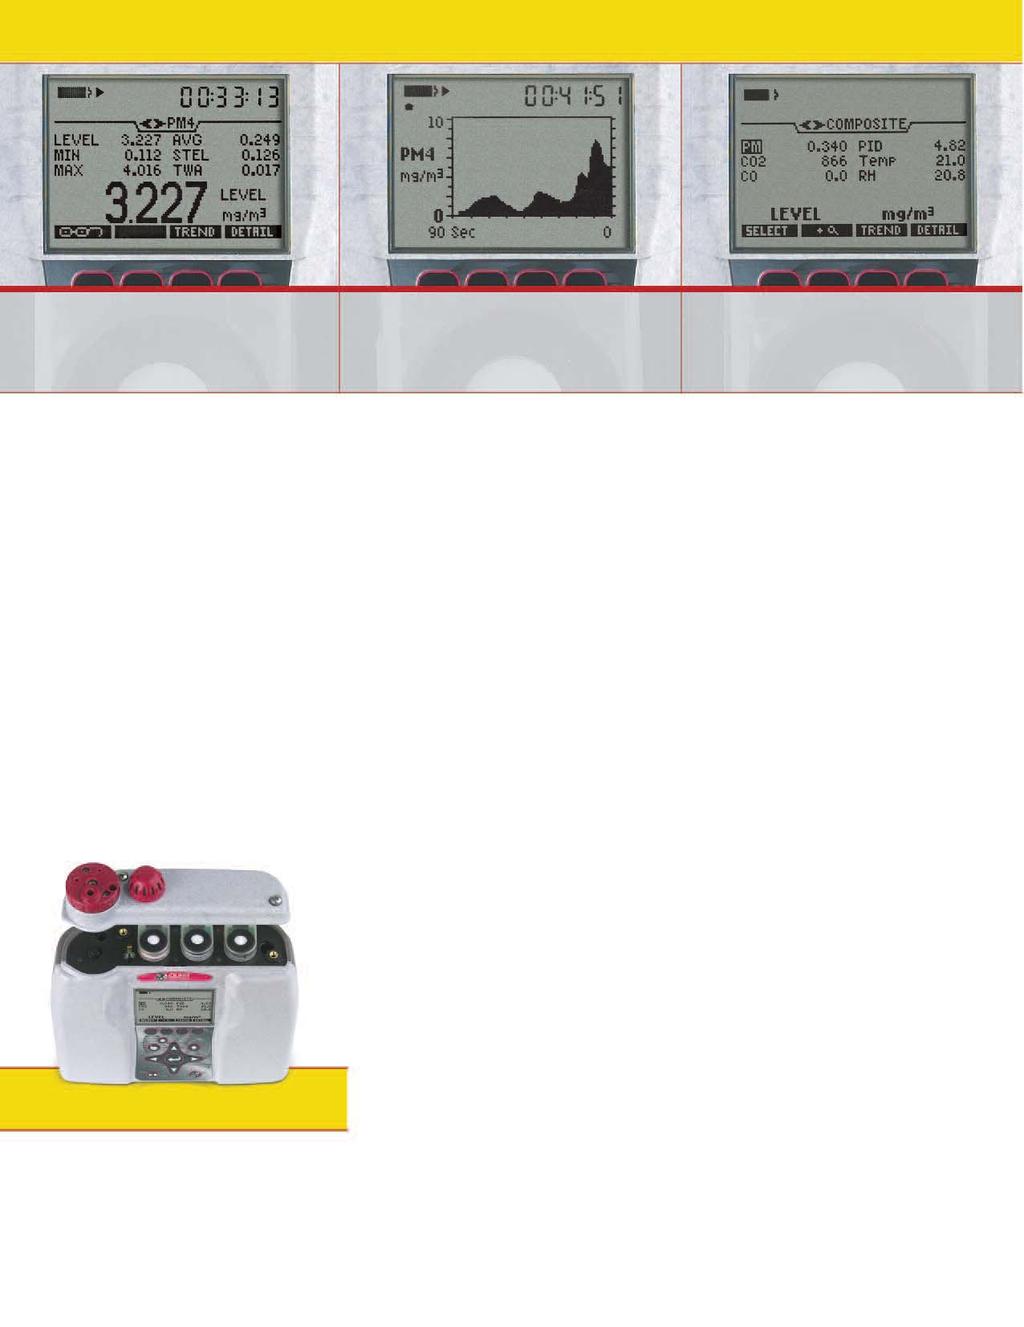 MEASUREMENT SCREEN EXAMPLES PARTICULATE CONCENTRATIONS SCREEN - Displays user-adjustable impactor setting and six simultaneous measurements.